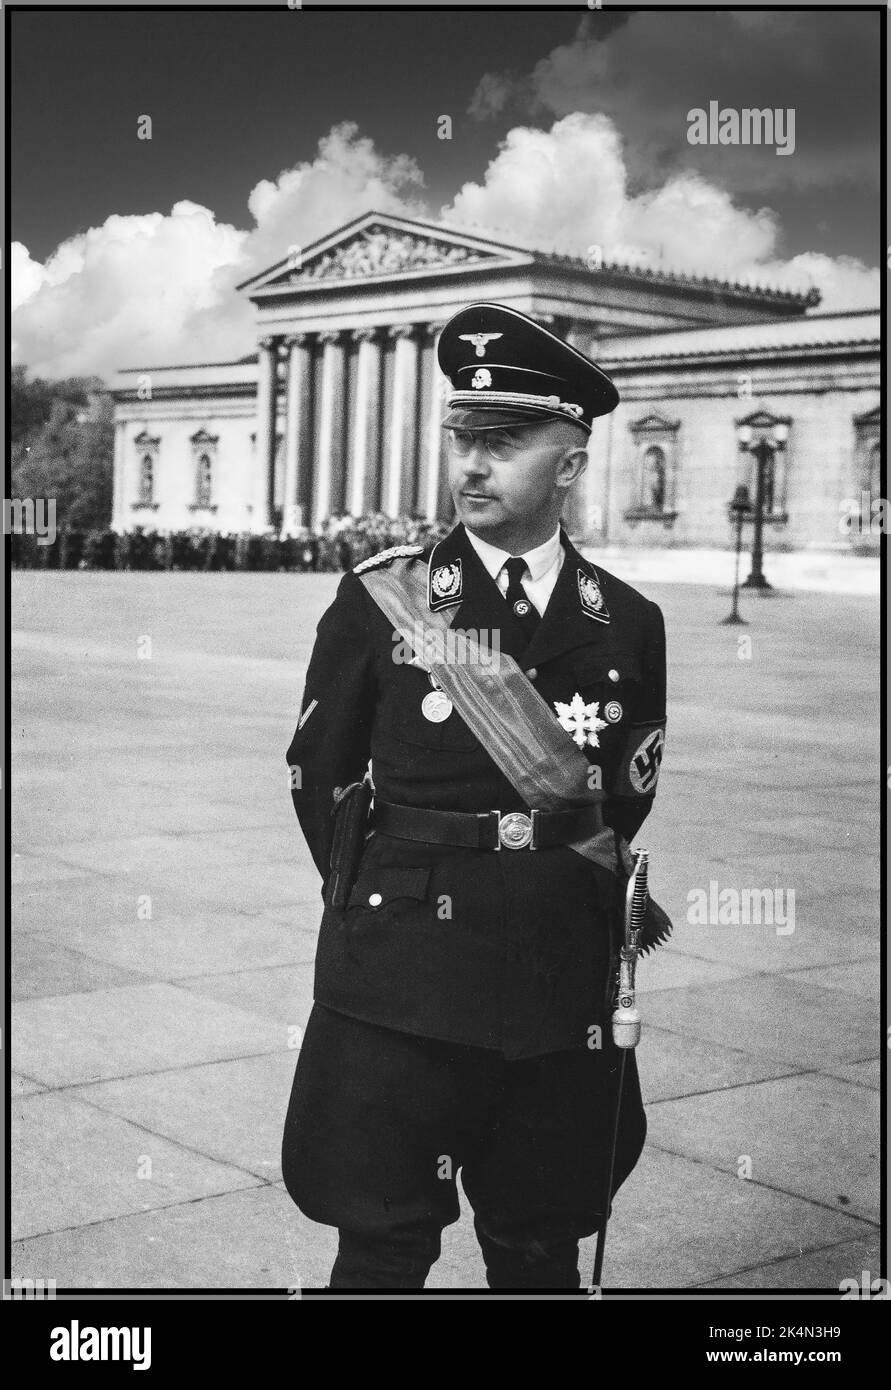 Heinrich Himmler in his full ceremonial Nazi Waffen SS uniform at the occasion of a meeting between Adolf Hitler and Benito Mussolini in Munich Nazi Germany 1930s Heinrich Luitpold Himmler was Reichsführer of the Schutzstaffel, and a leading member of the Nazi Party of Germany.  Himmler was one of the most powerful men in Nazi Germany and a main architect of the Holocaust. Himmler a war criminal guilty of crimes against humanity commited suicide in 1945 to escape his inevitable execution by hanging. Stock Photo